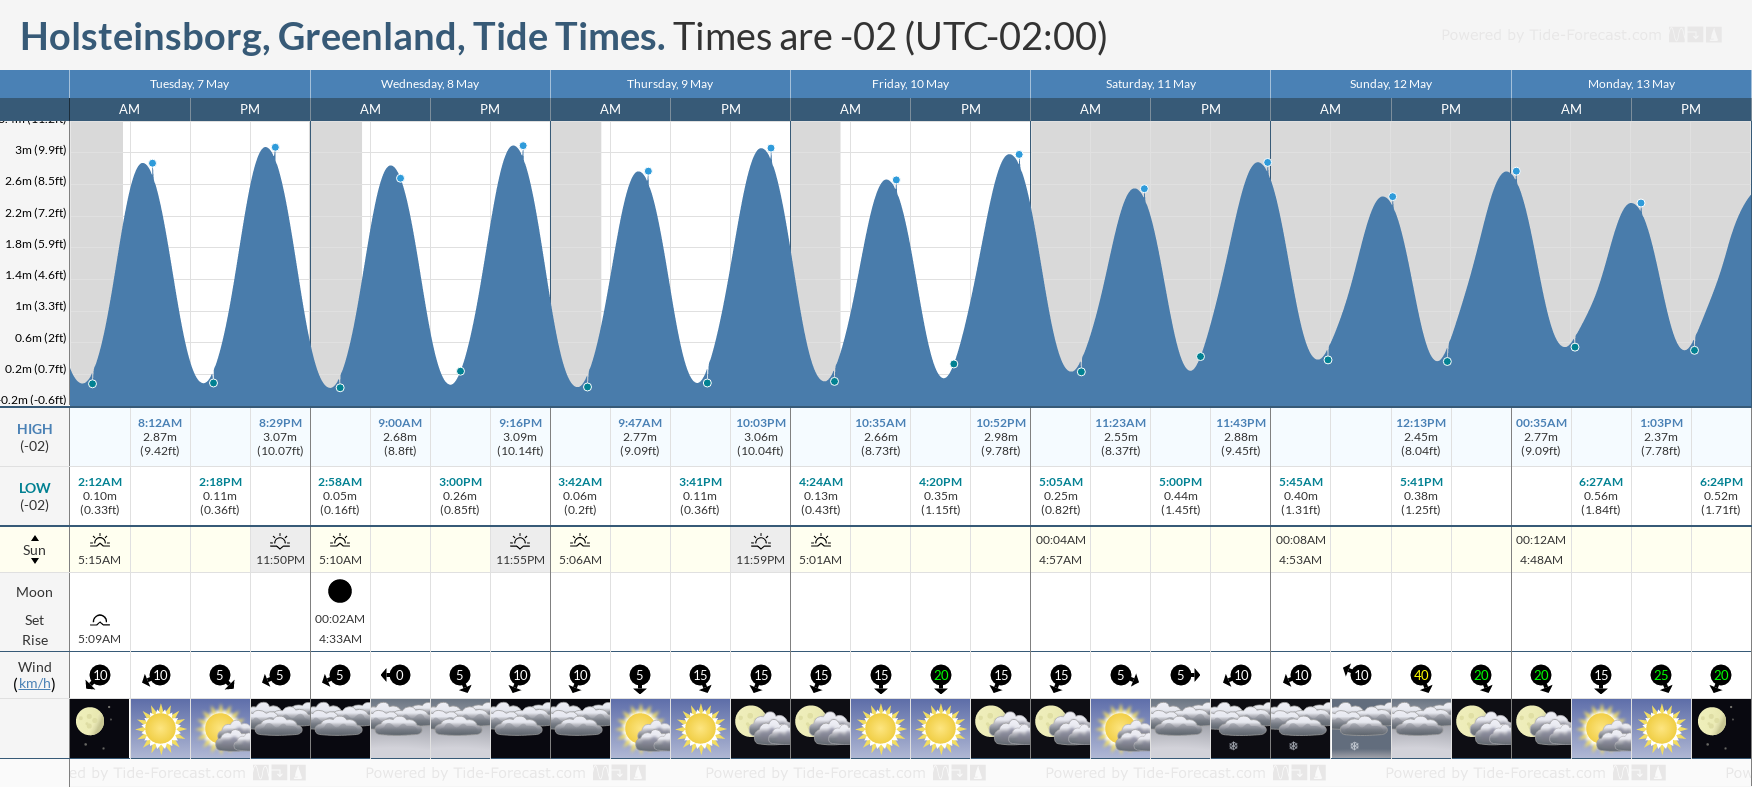 Holsteinsborg, Greenland Tide Chart including high and low tide tide times for the next 7 days